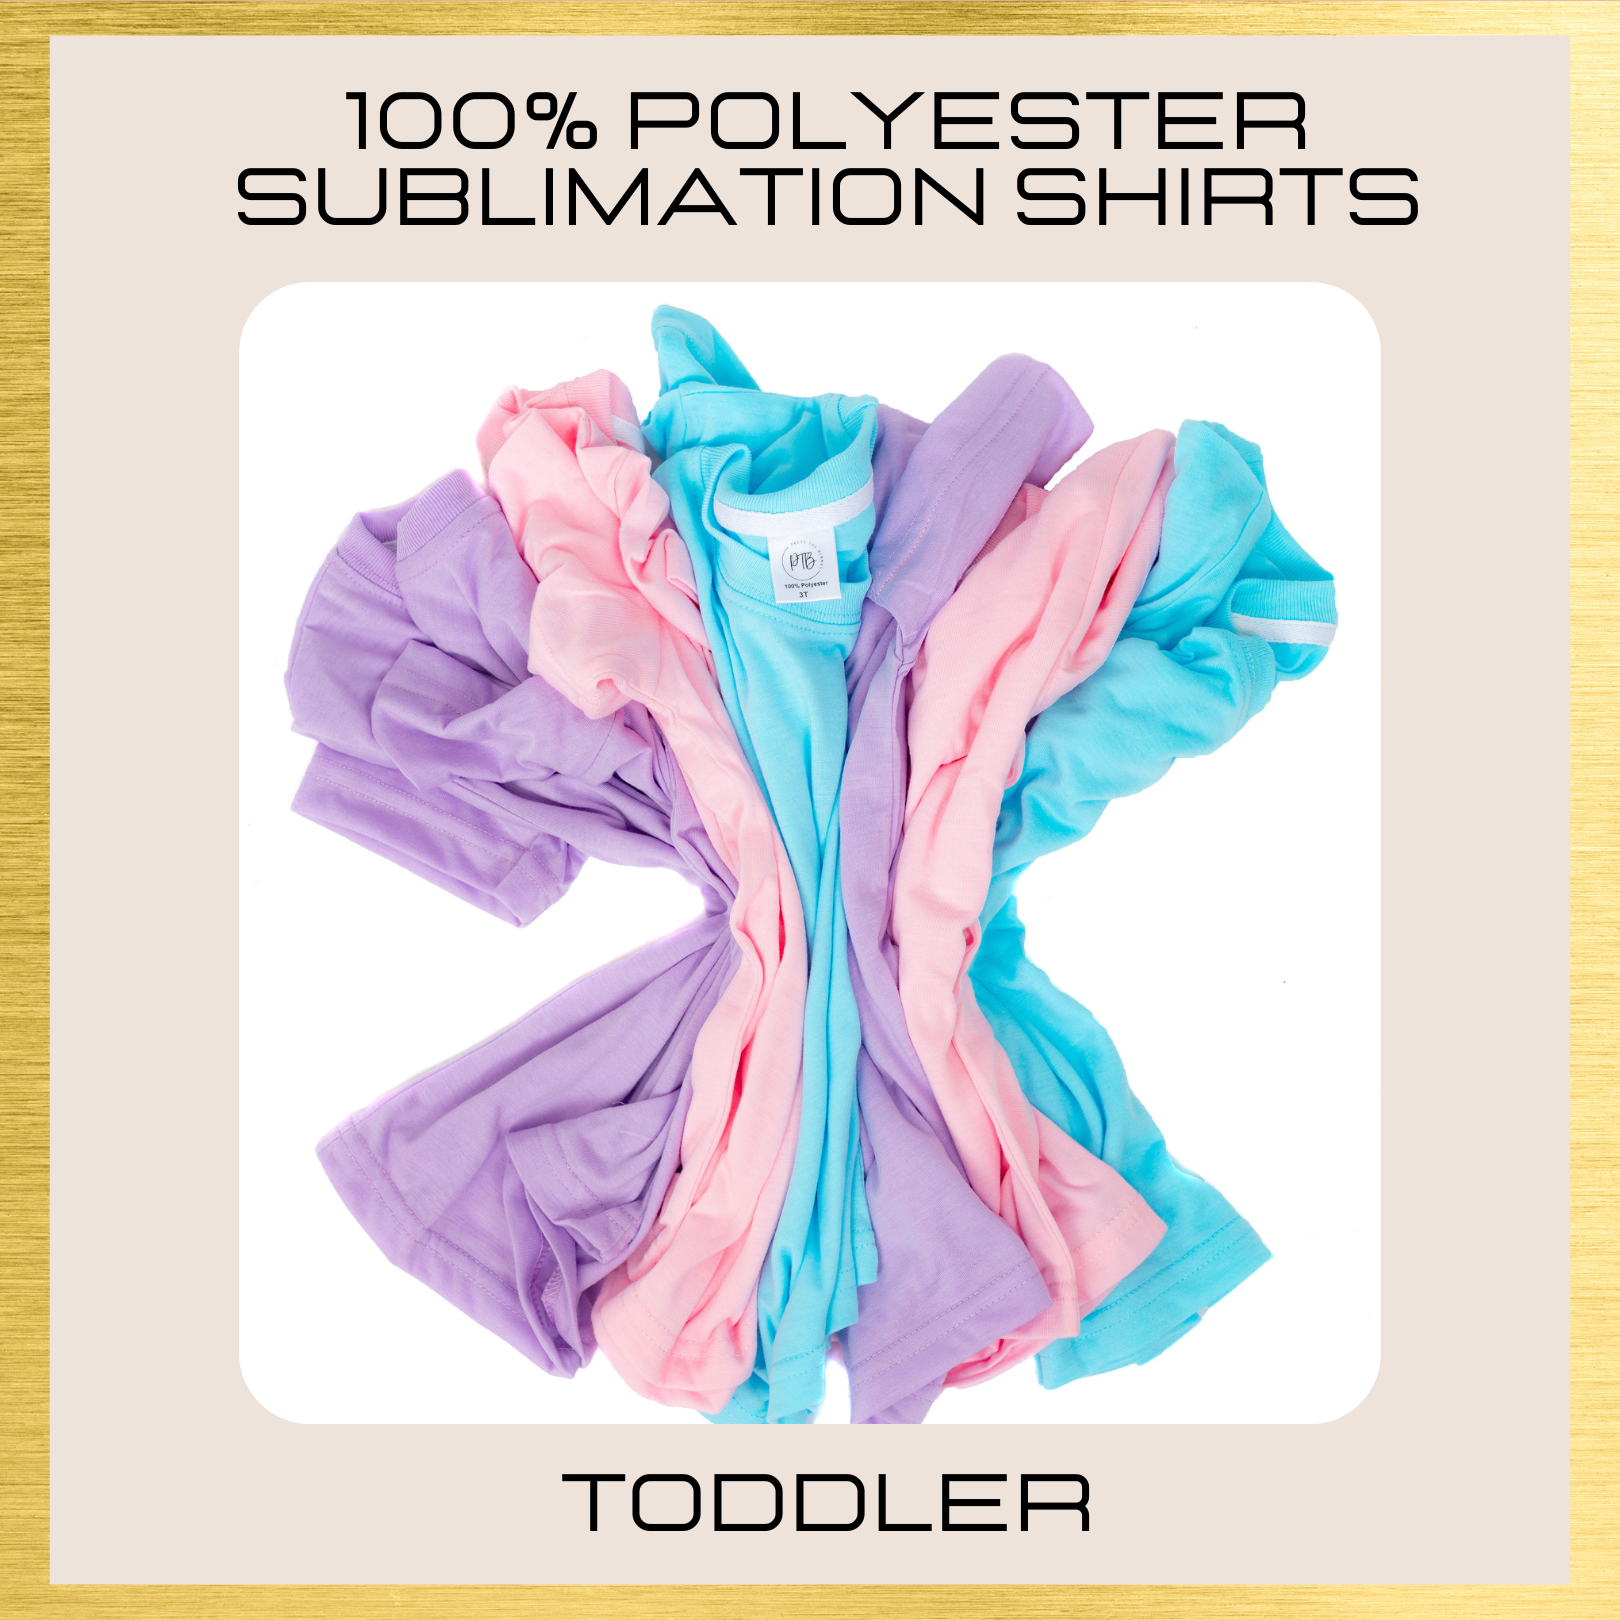 100% Polyester TODDLER Sublimation Shirt Kids Colored Sublimation